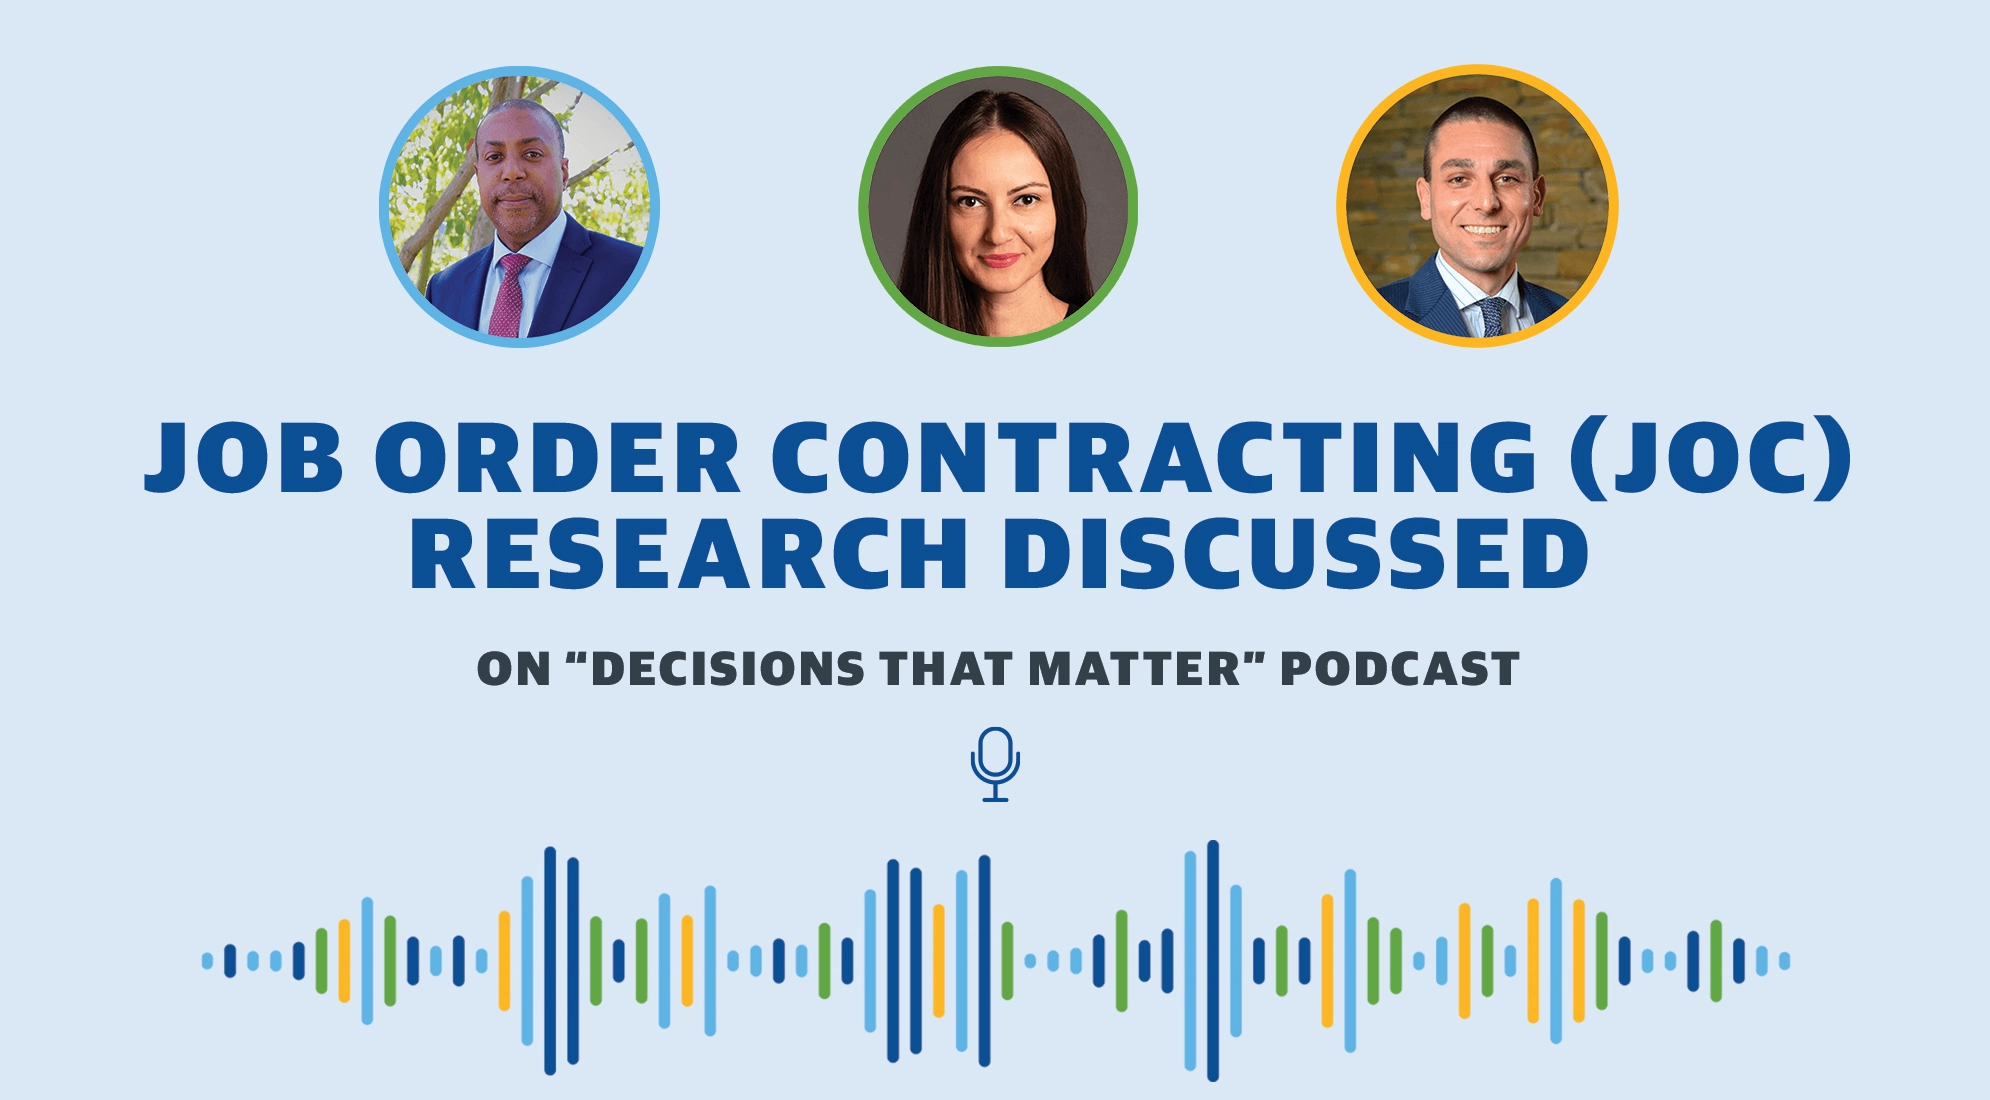 Job Order Contracting Research Discussed on “Decisions That Matter” Podcast